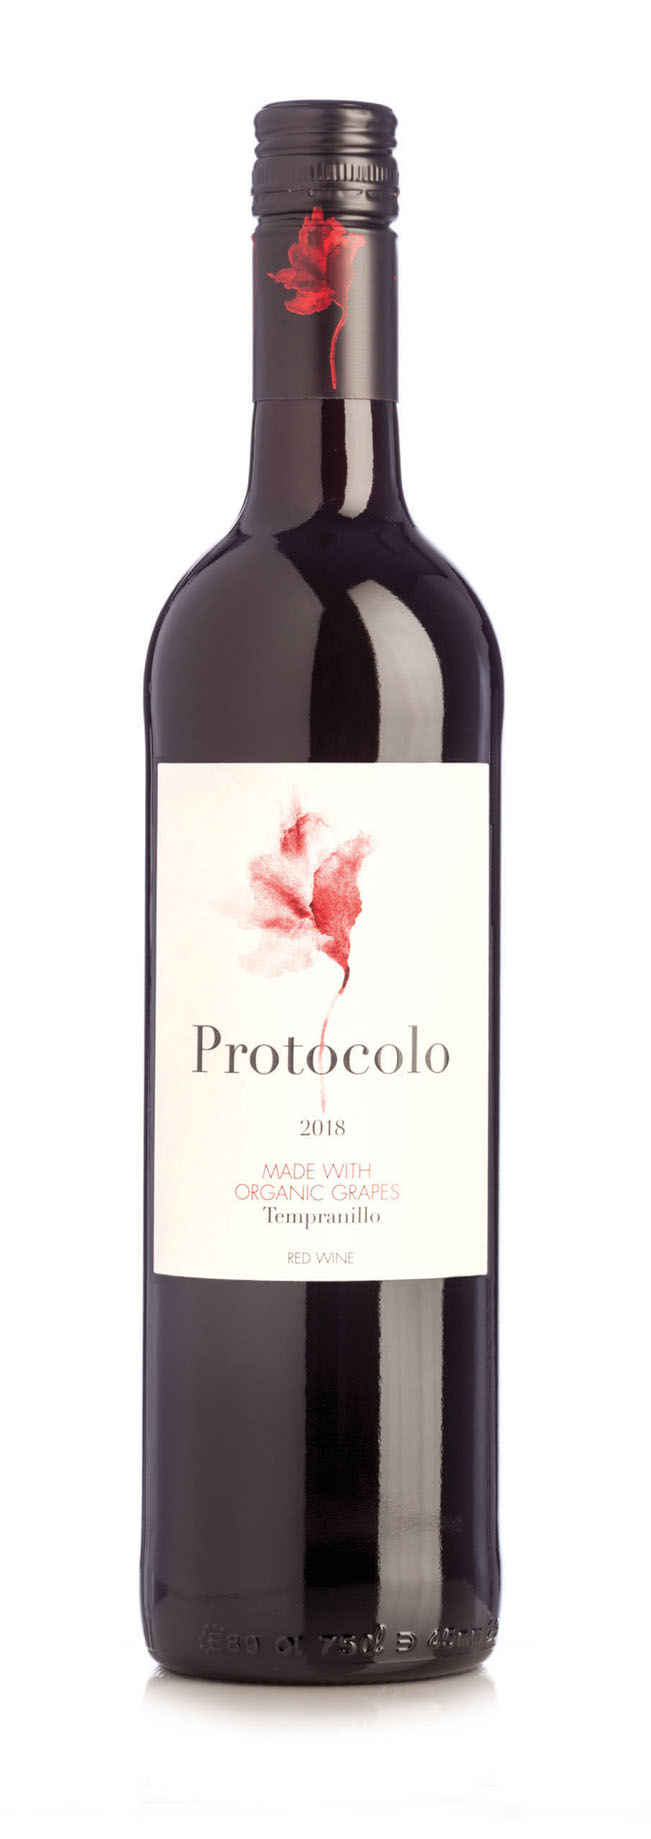 Protocolo Tinto made with Organic Grapes Bottle Photo